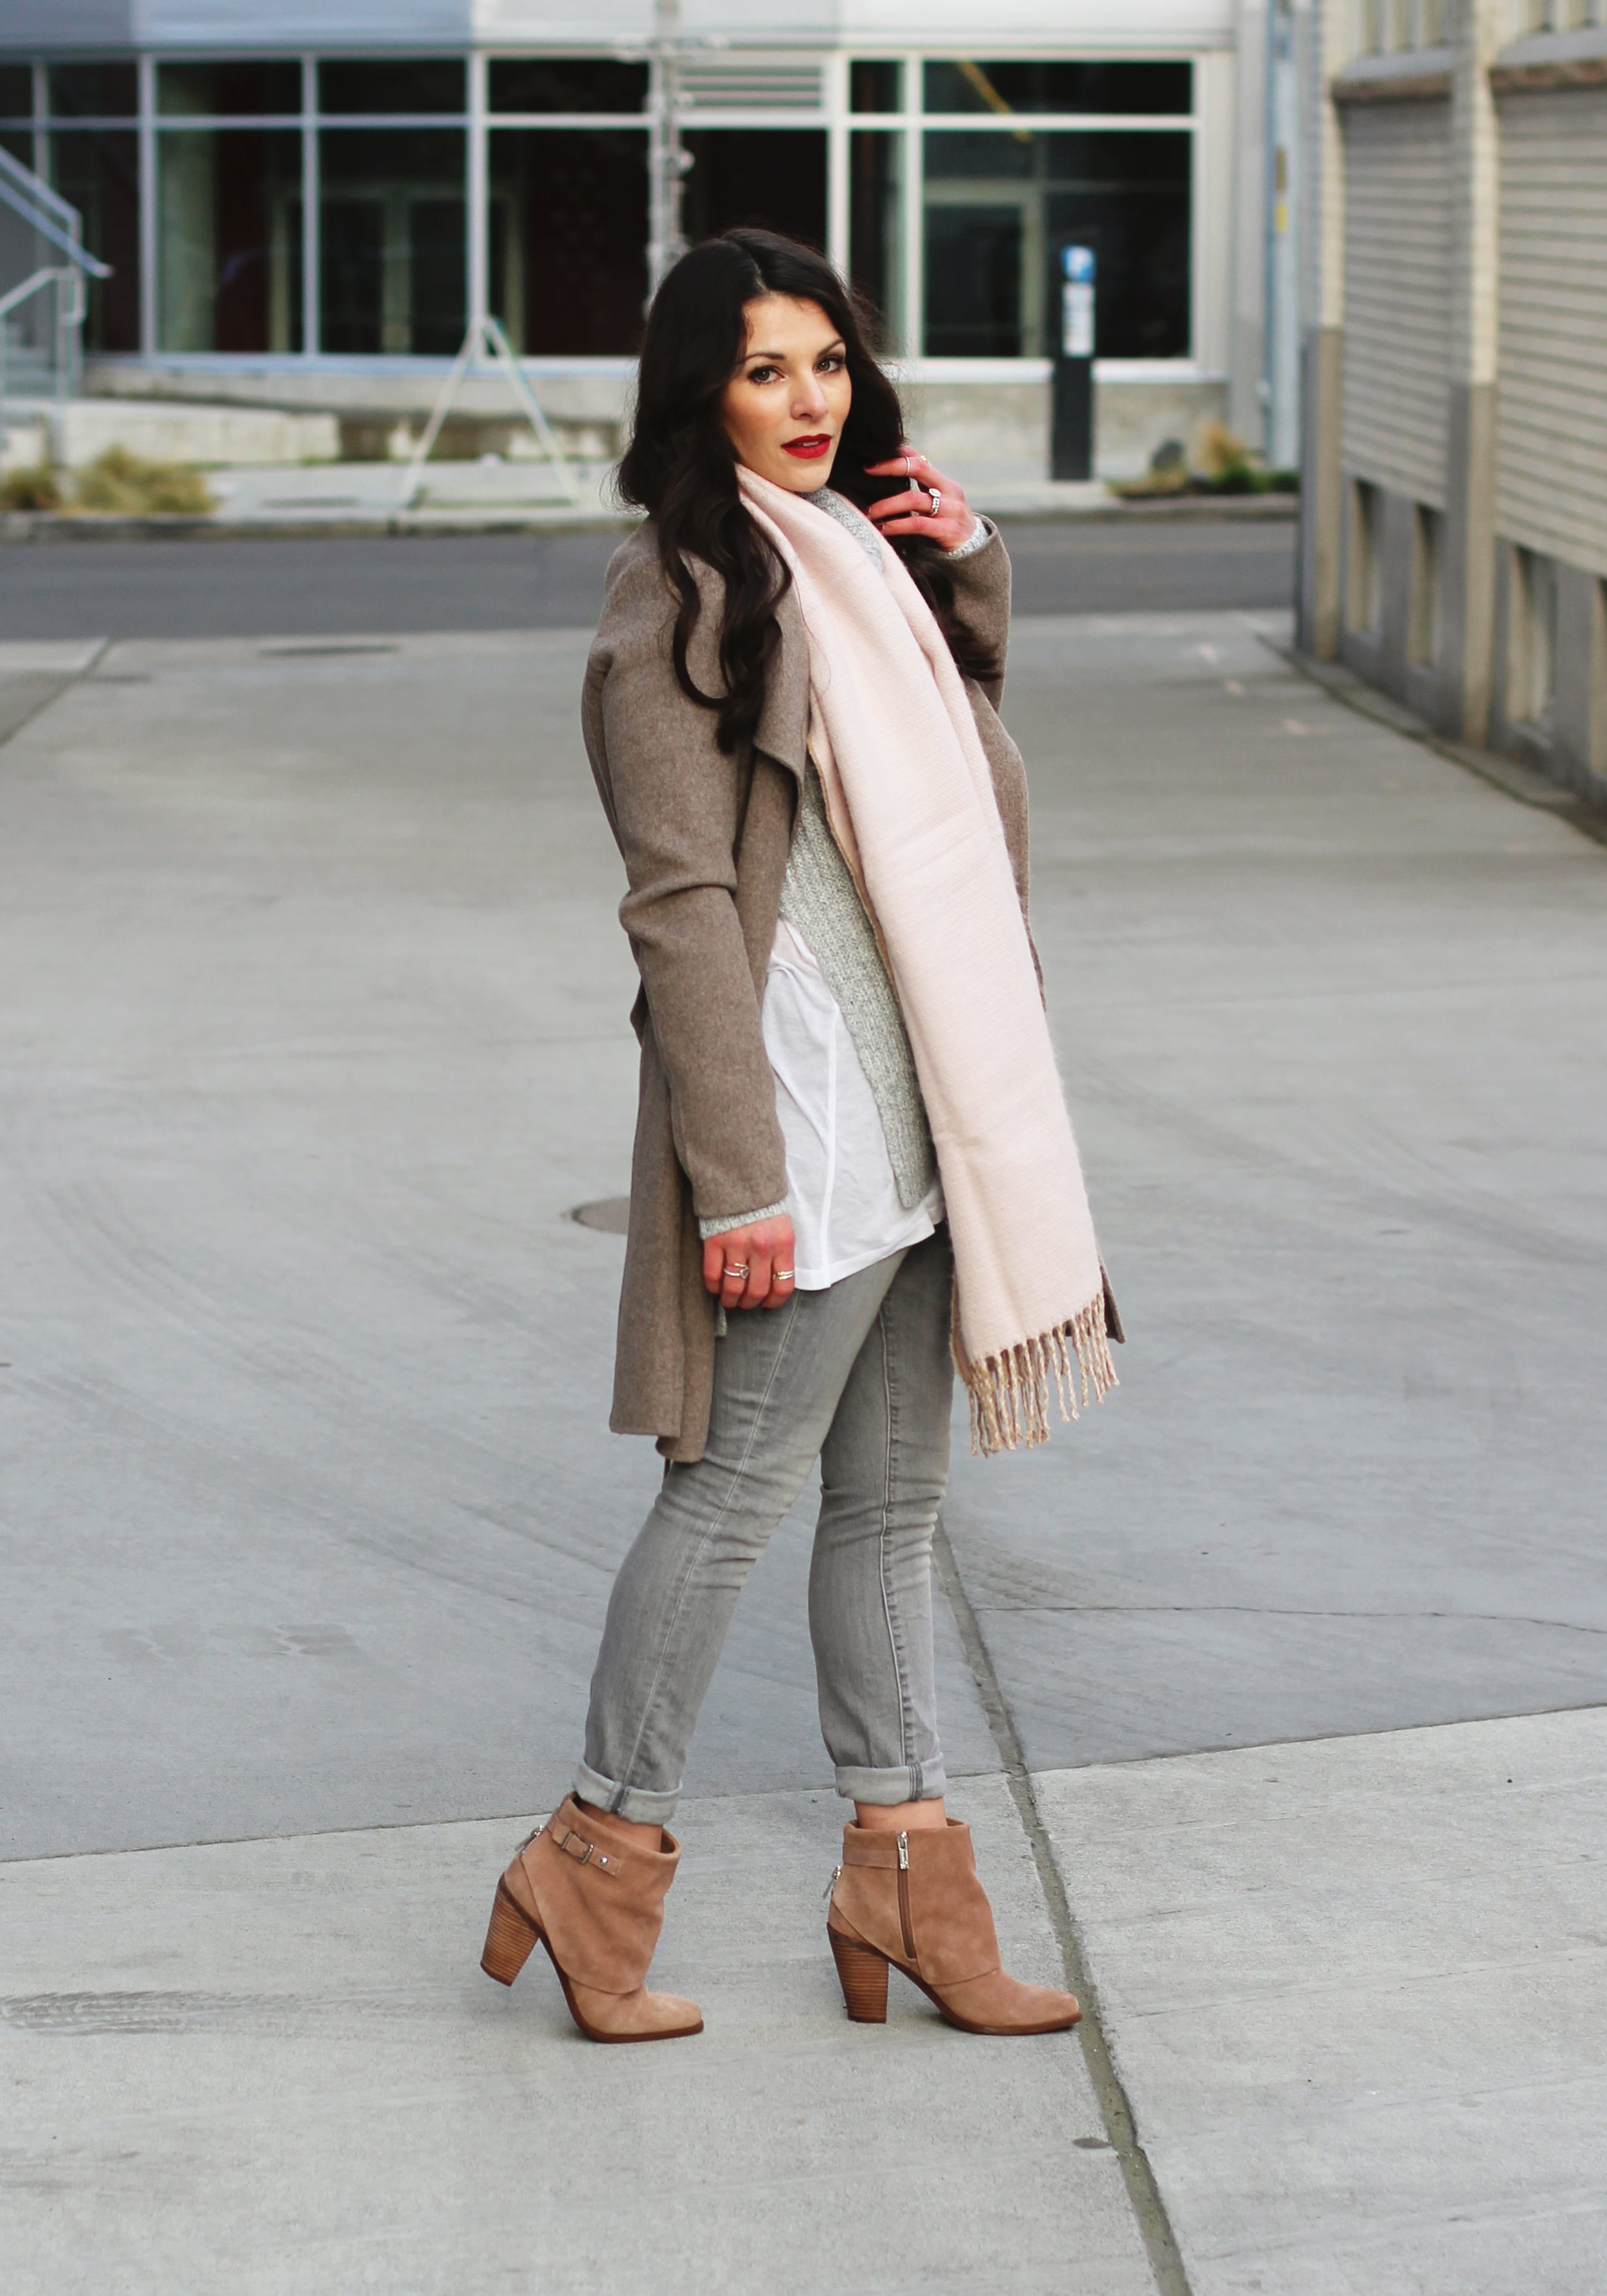 Gray Outfit, Groutfit, Winter Outfit, Forever 21 Ribbed Turtleneck Sweater, Gap Skinny Jeans, Jessica Simpson Nude Suede Booties, Blush Pink Scarf, Banana Republic Belted Wrap Coat